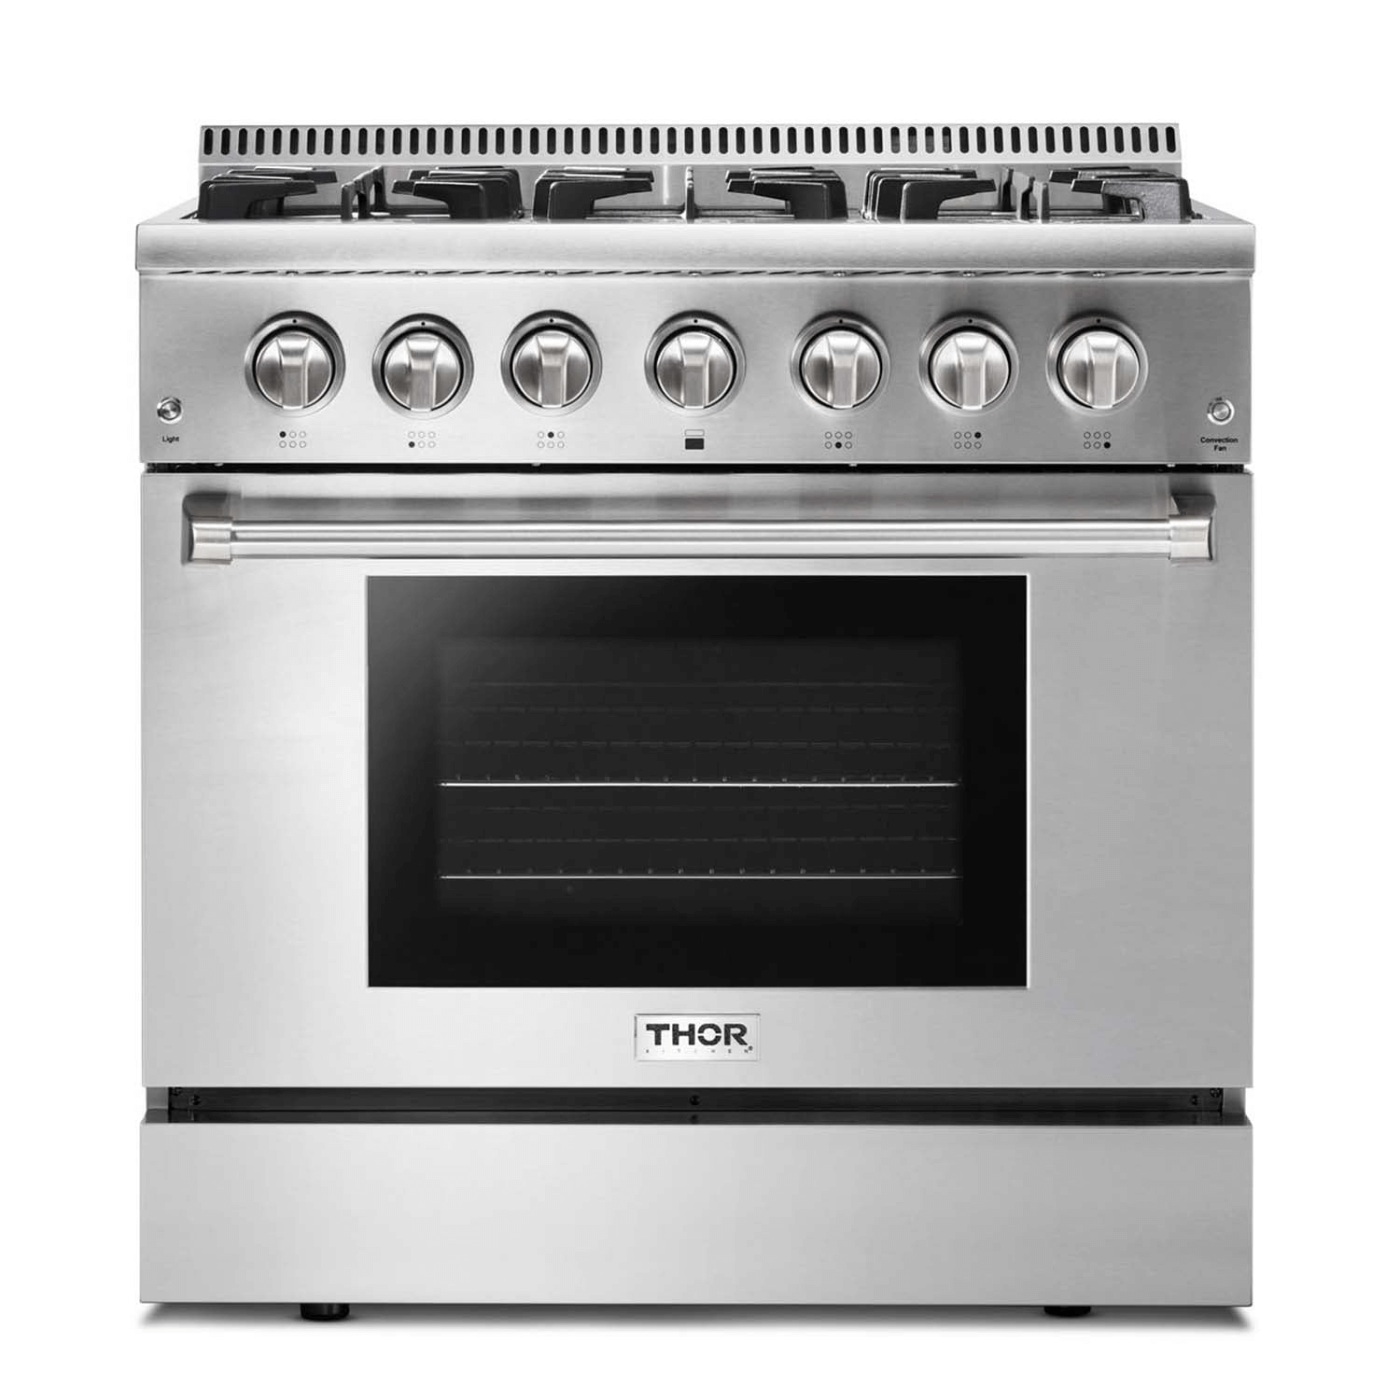 Thor Kitchen 36" Professional Dual Fuel Gas Range in Stainless Steel - white background